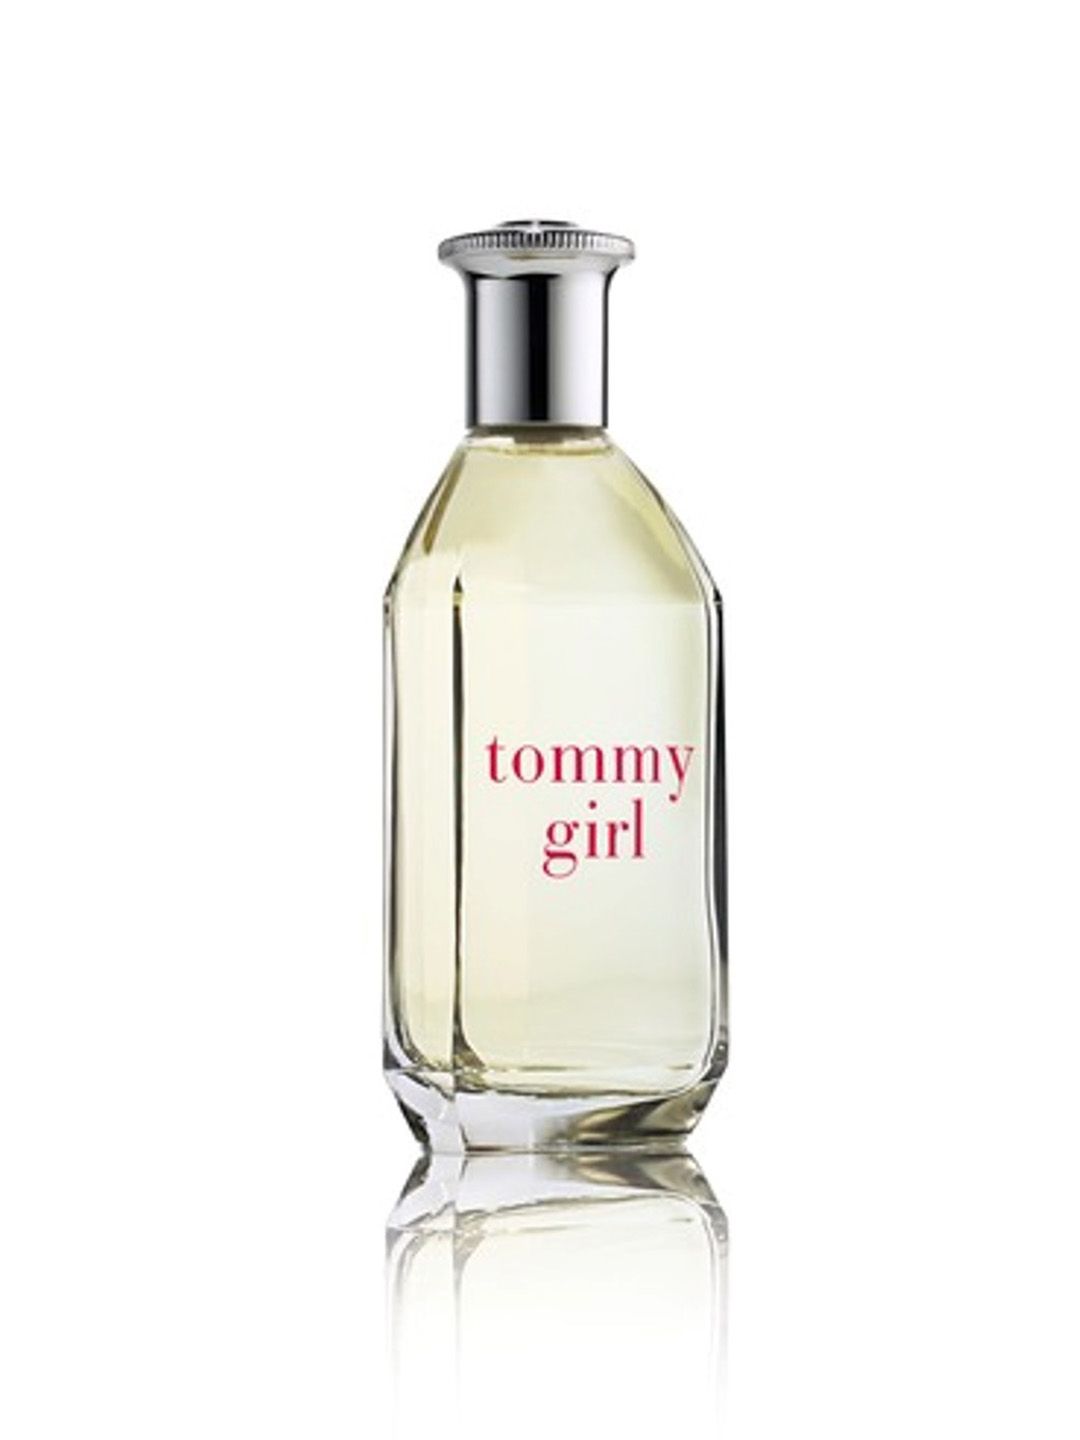 Tommy Hilfiger Girl Cologne Spray 50 ml Price in India